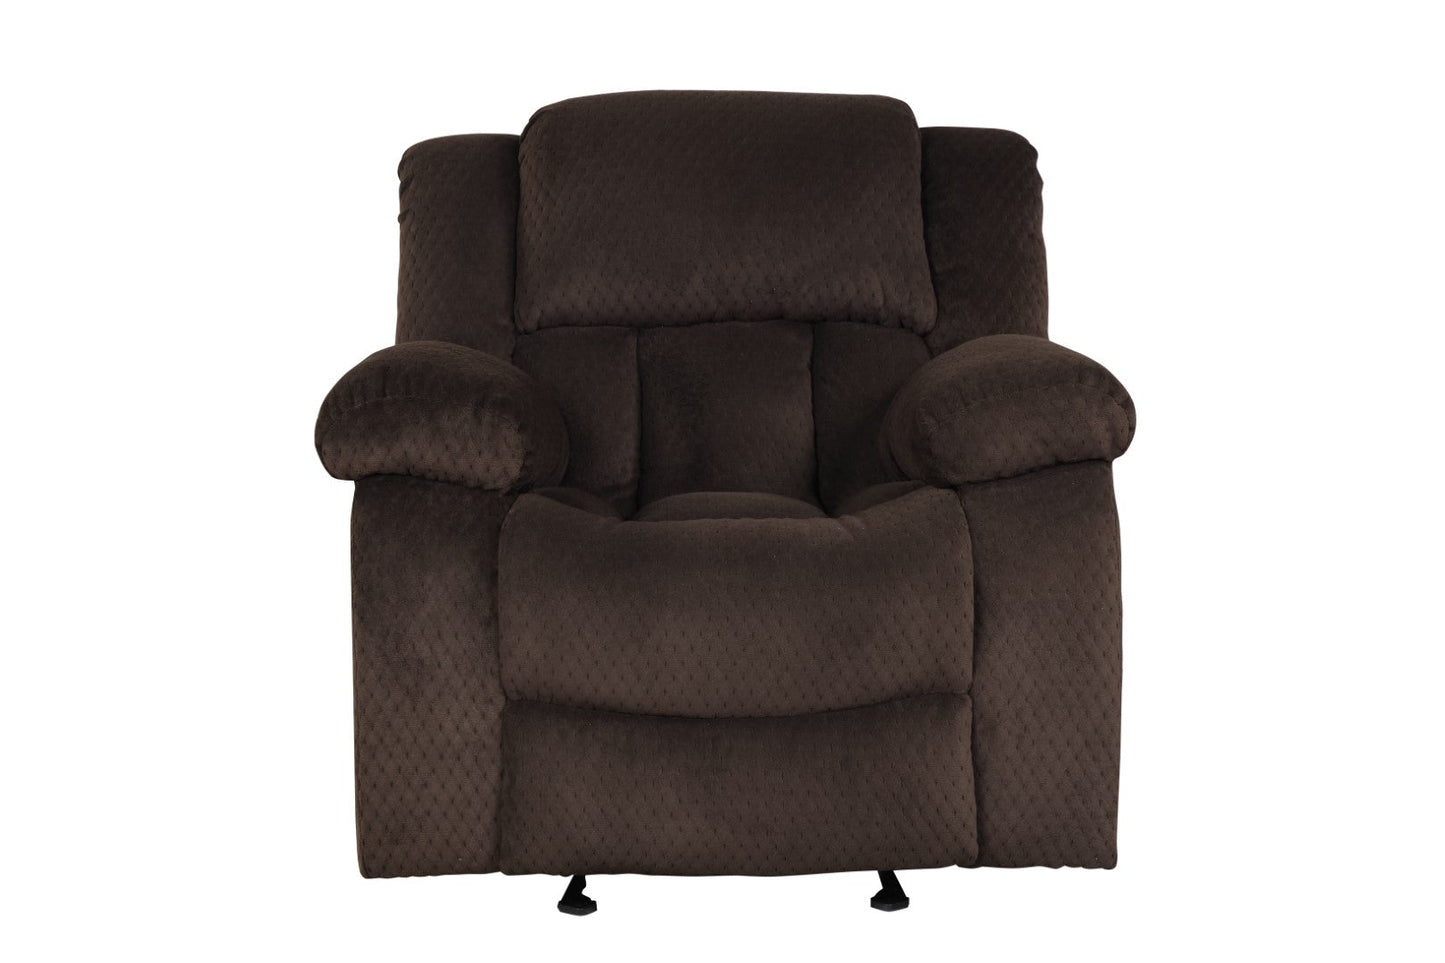 Galaxy Home Armada Manual Reclining Chair Made with Chenille Fabric Brown Chenille Fabric